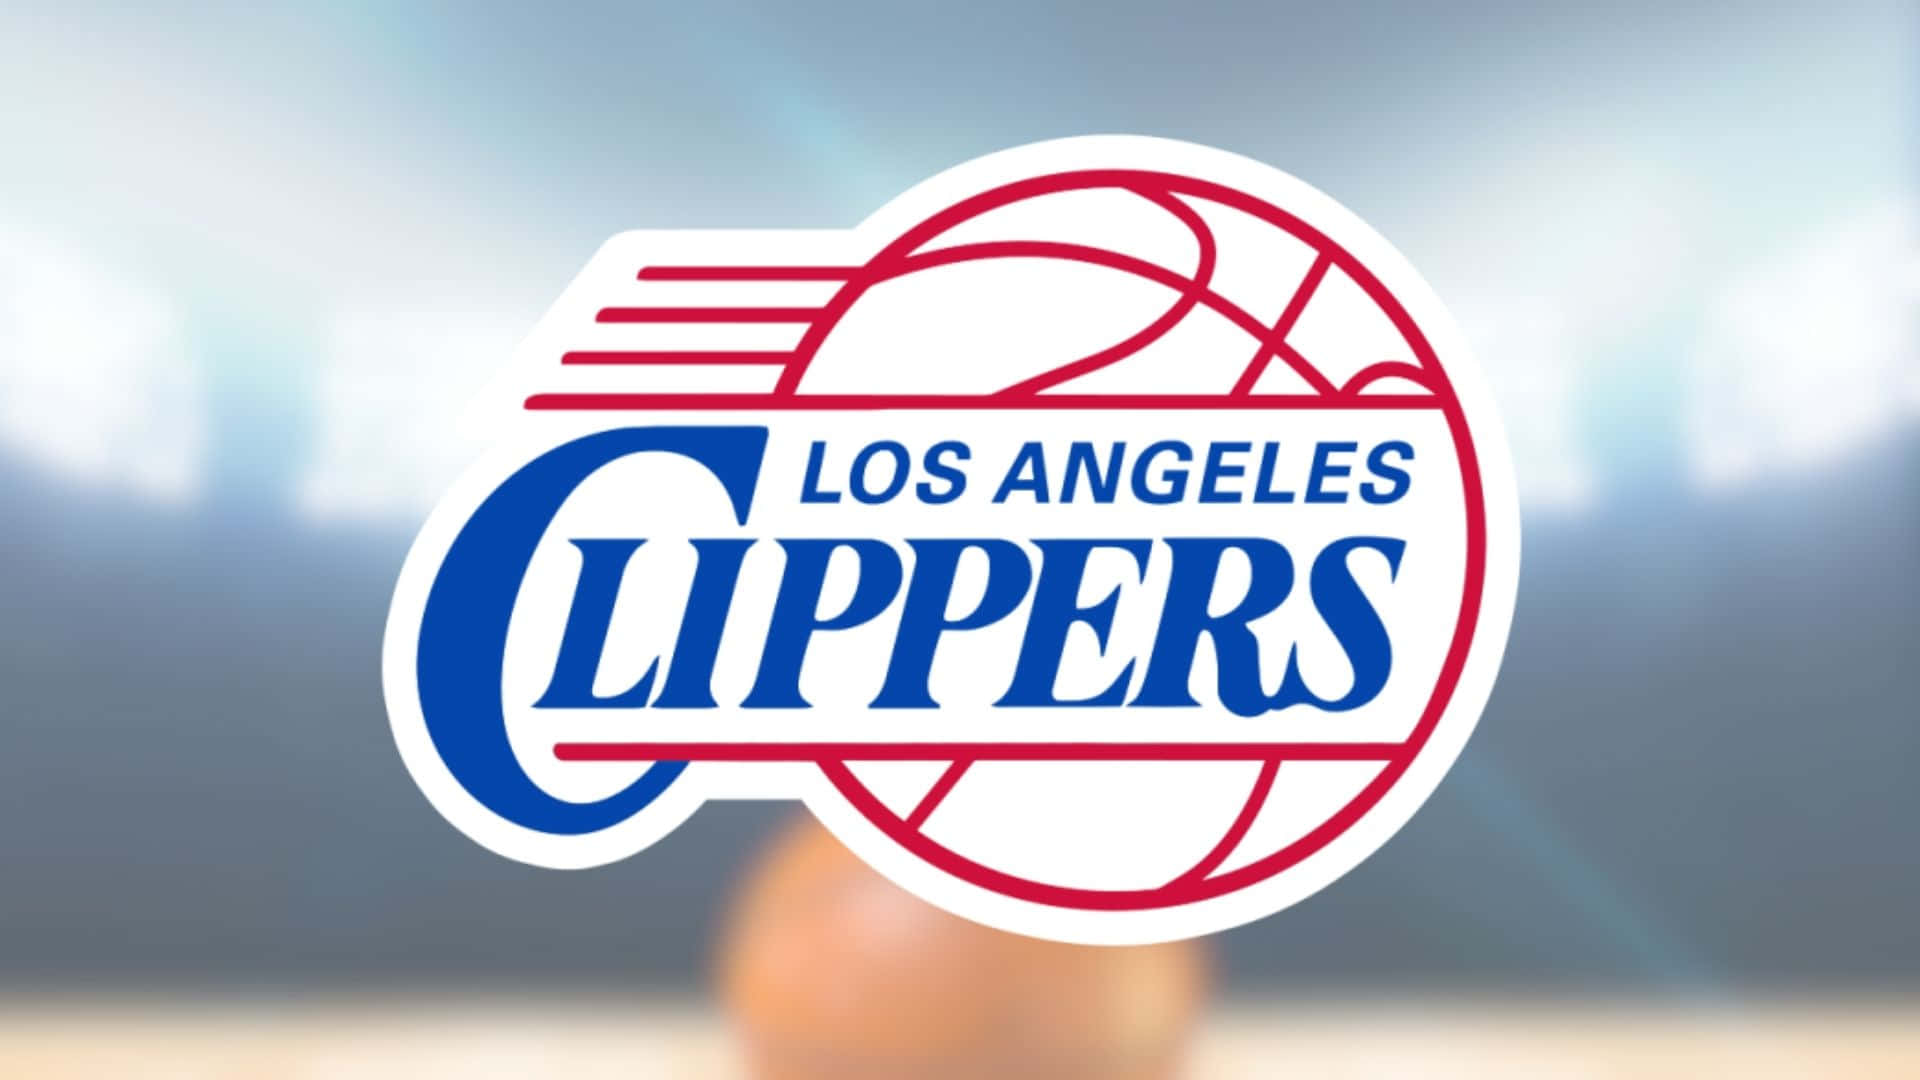 The Los Angeles Clippers Come Out to Play Wallpaper